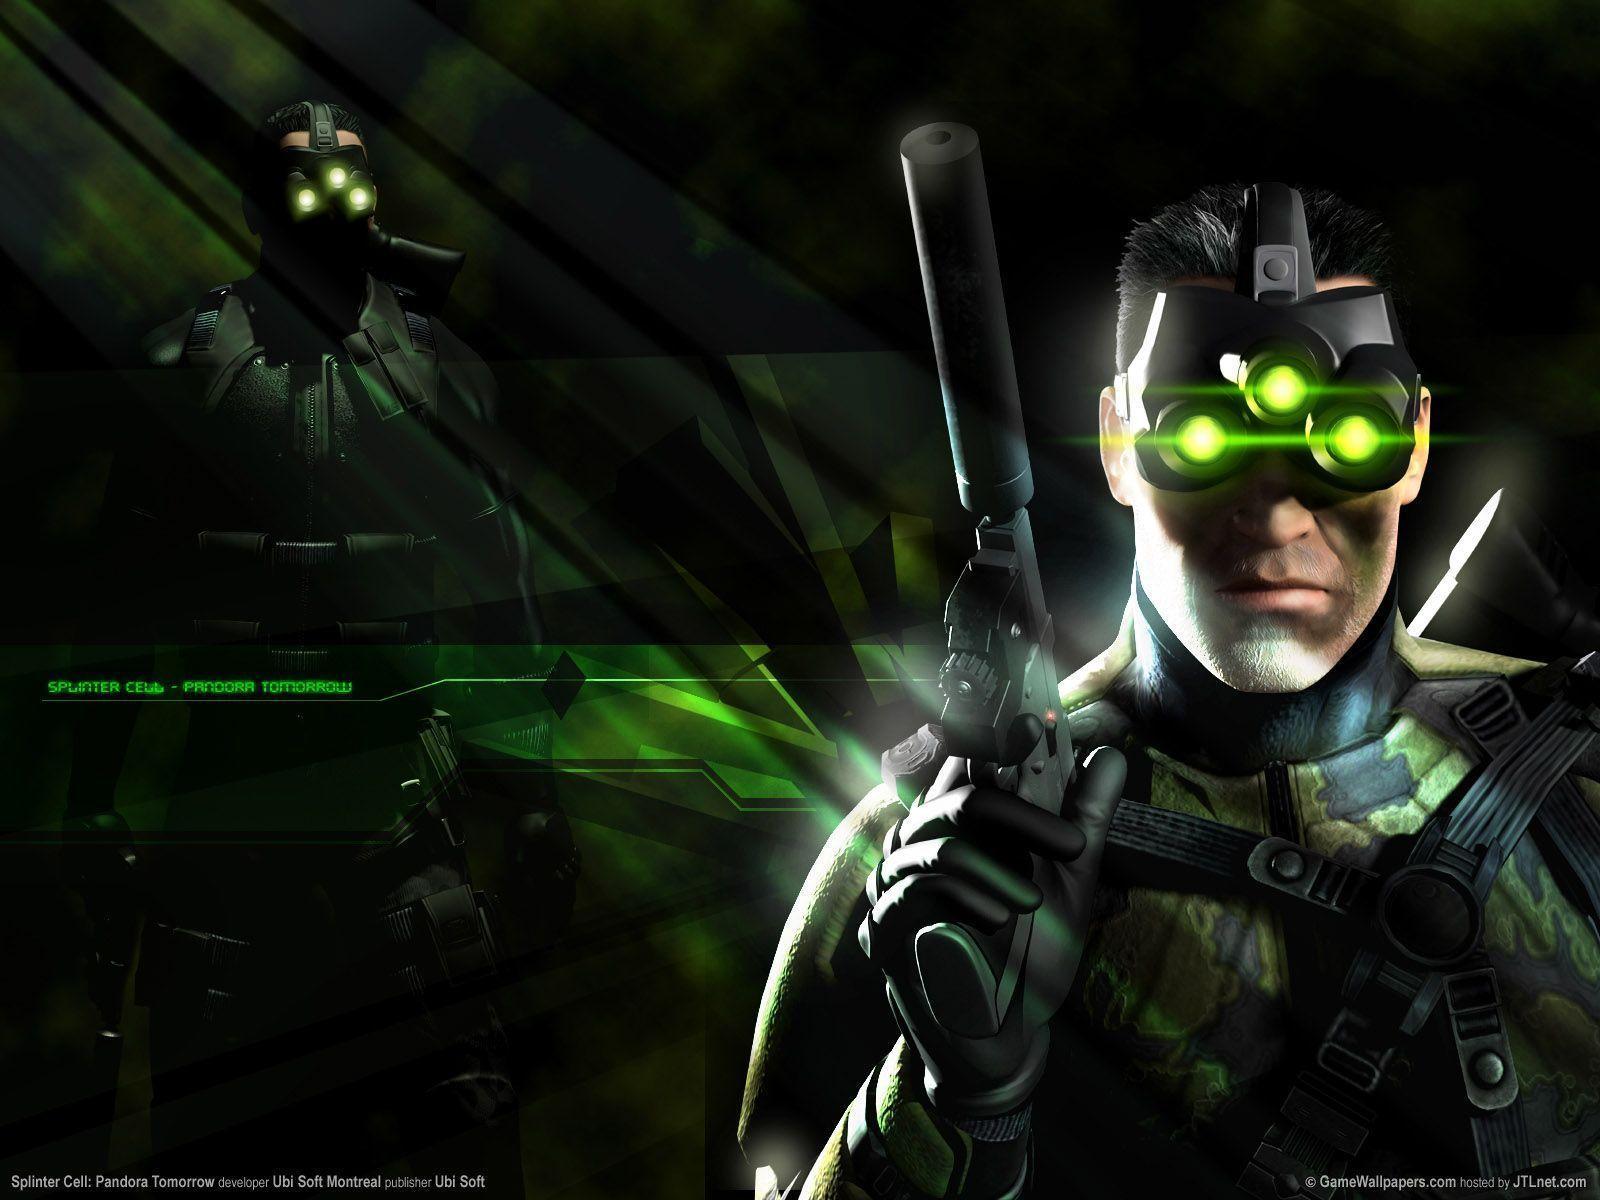 Fantastic Splinter Cell Chaos Theory Wallpaper 1600x1200PX Cell